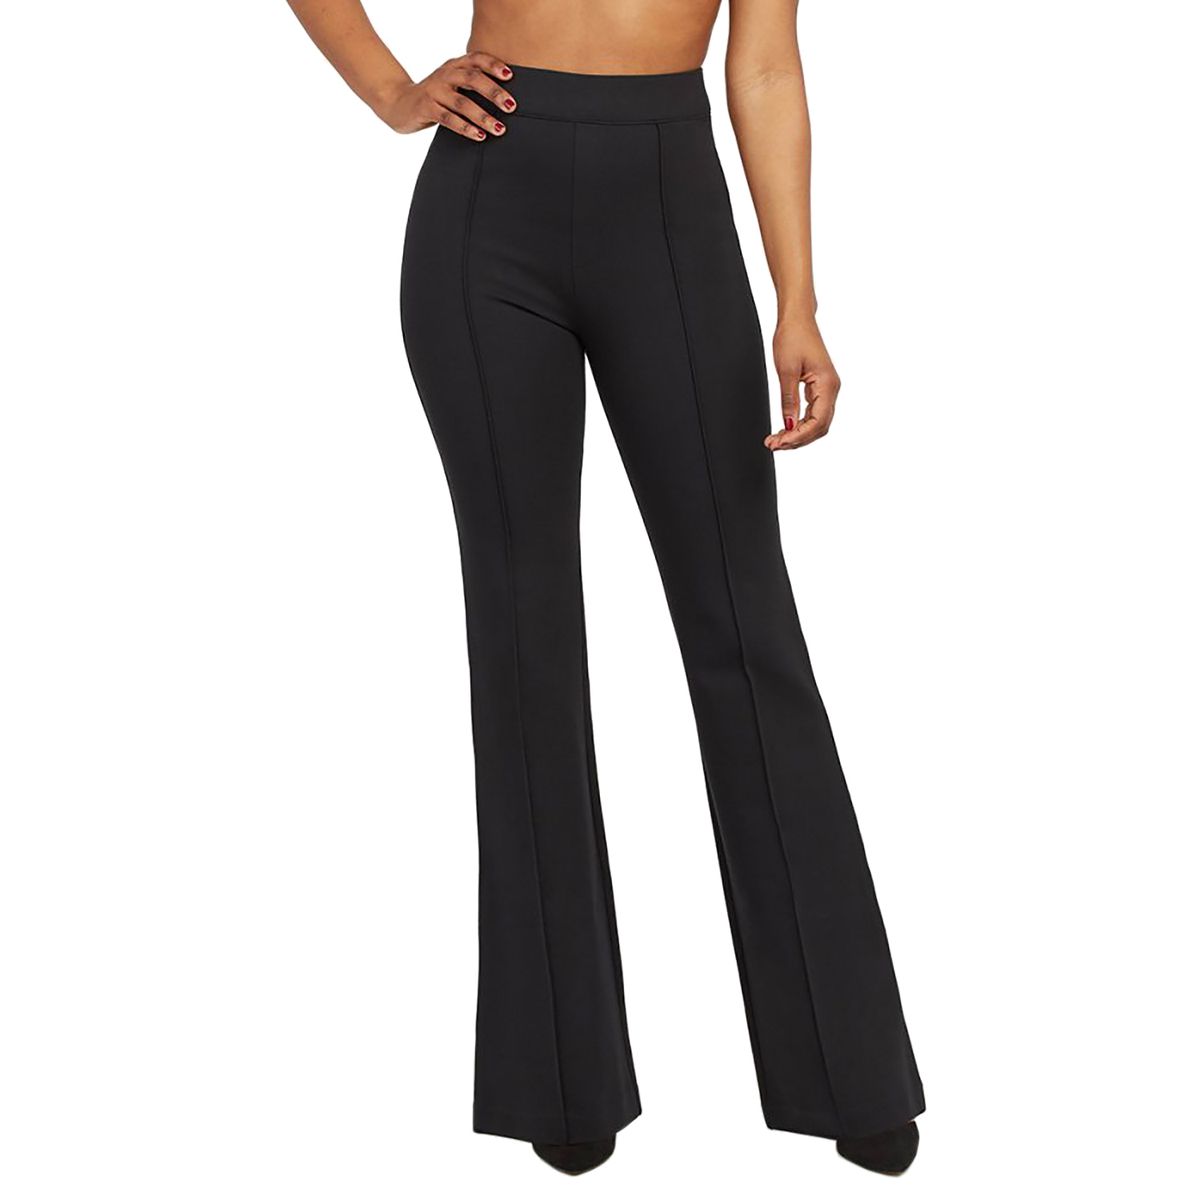 Spanx Black Friday Sale 2020 Includes Oprah-Approved Pants | InStyle